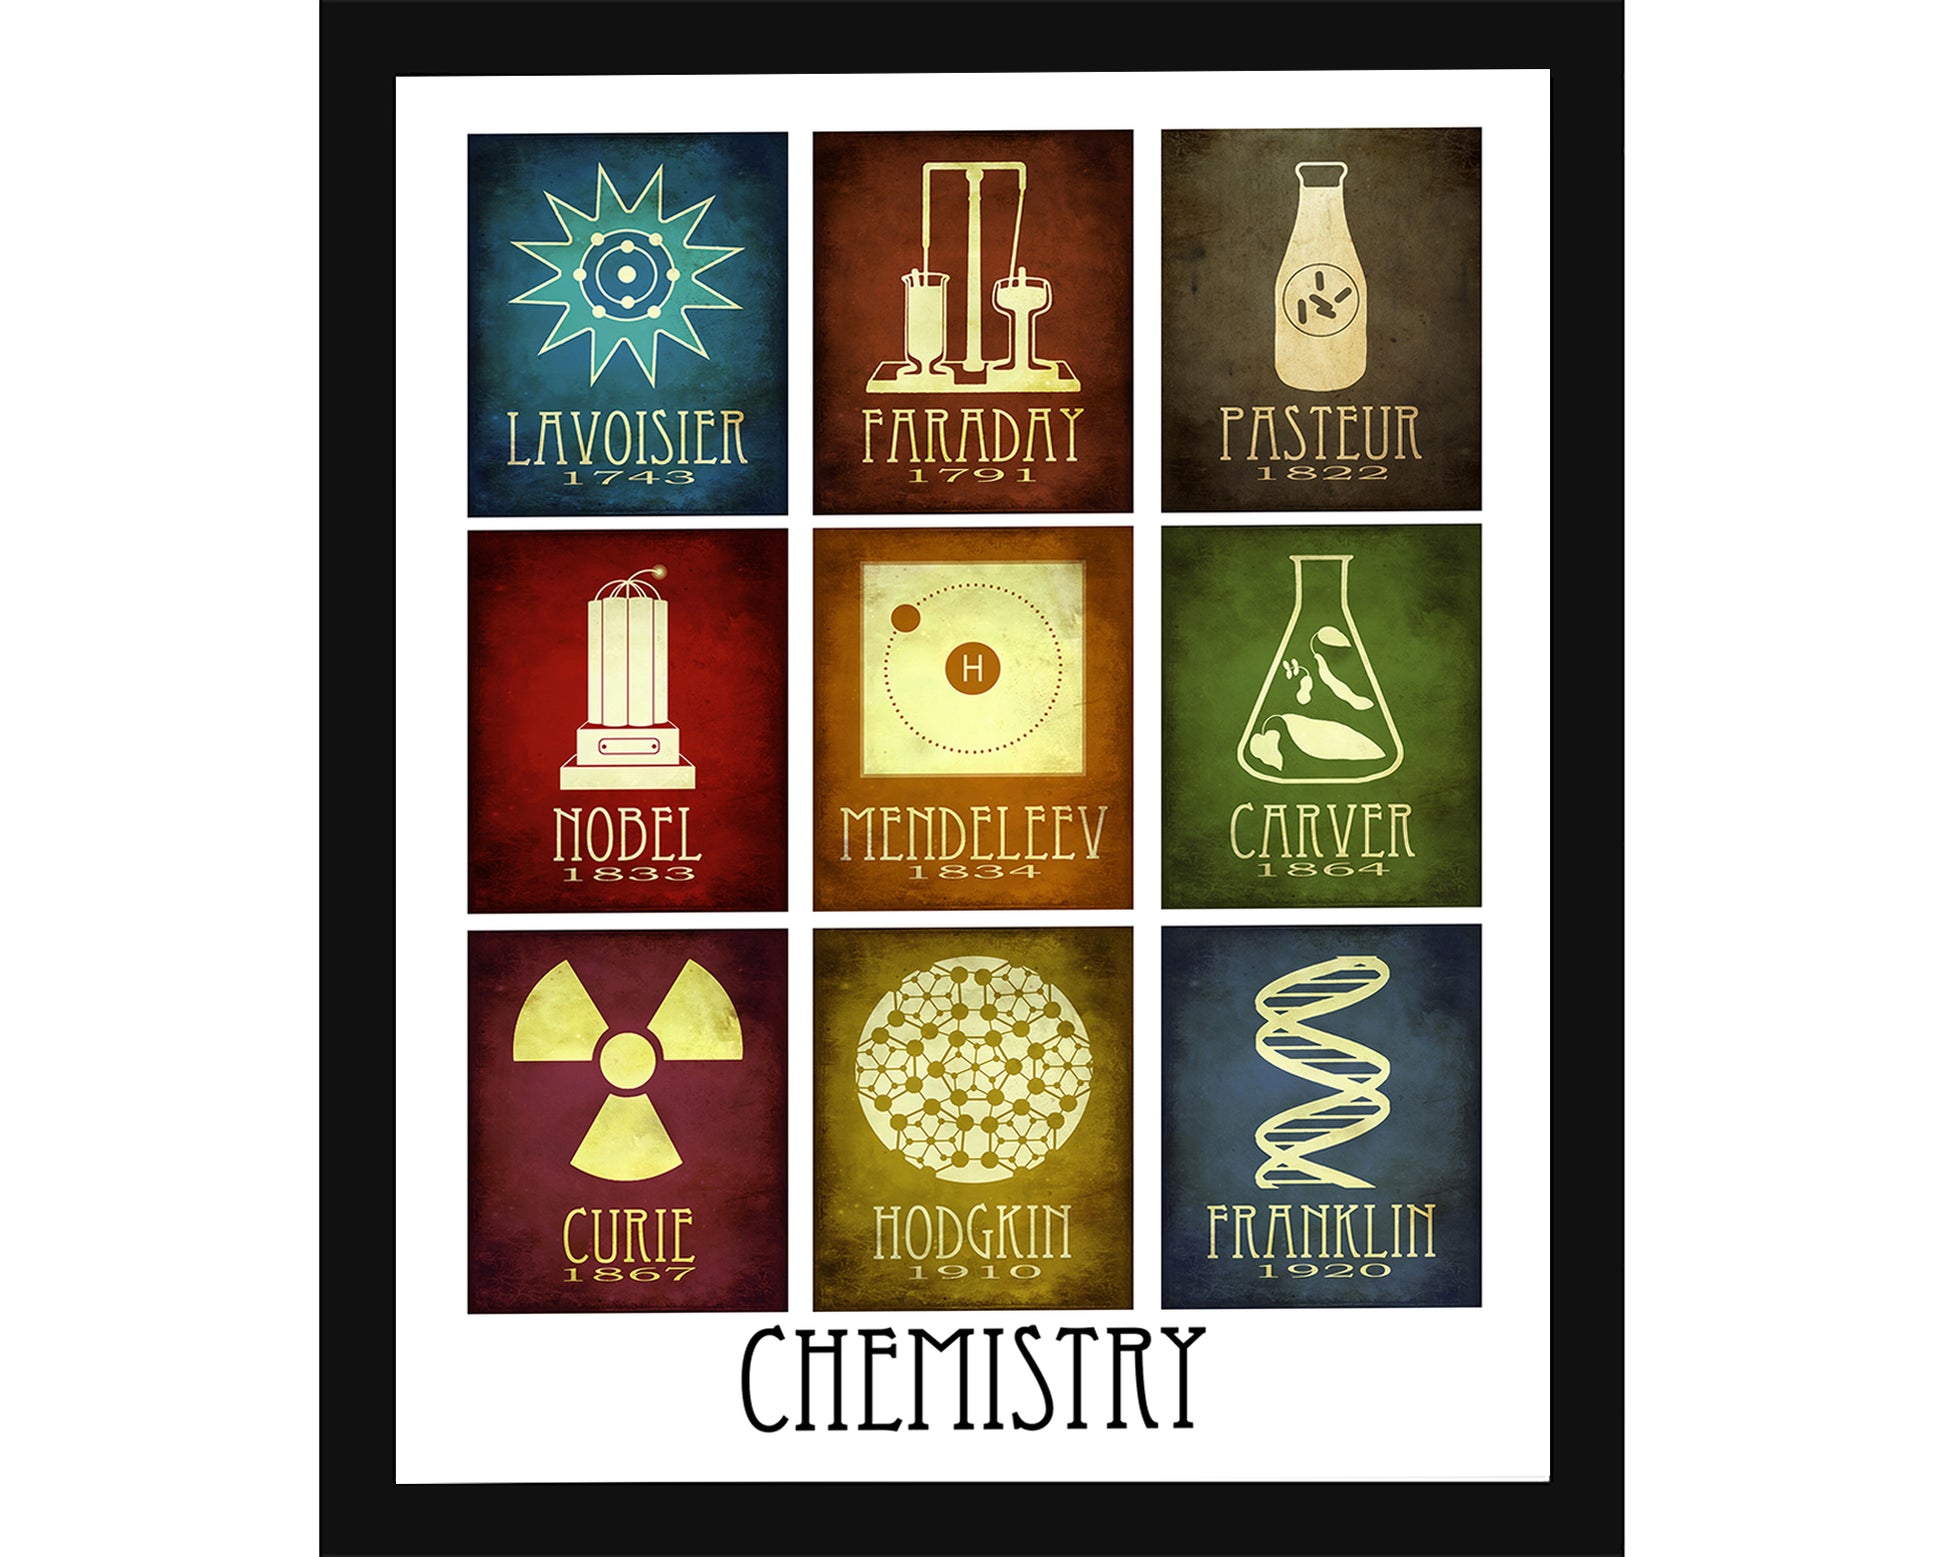 Chemistry art print with minimalist science designs paying tribute to Lavoisier, Michael Faraday, Louis Pasteur, Alfred Nobel, Dmitri Mendeleev, George Washington Carver, Marie Curie, Dorothy Hodgkin, and Rosalind Franklin